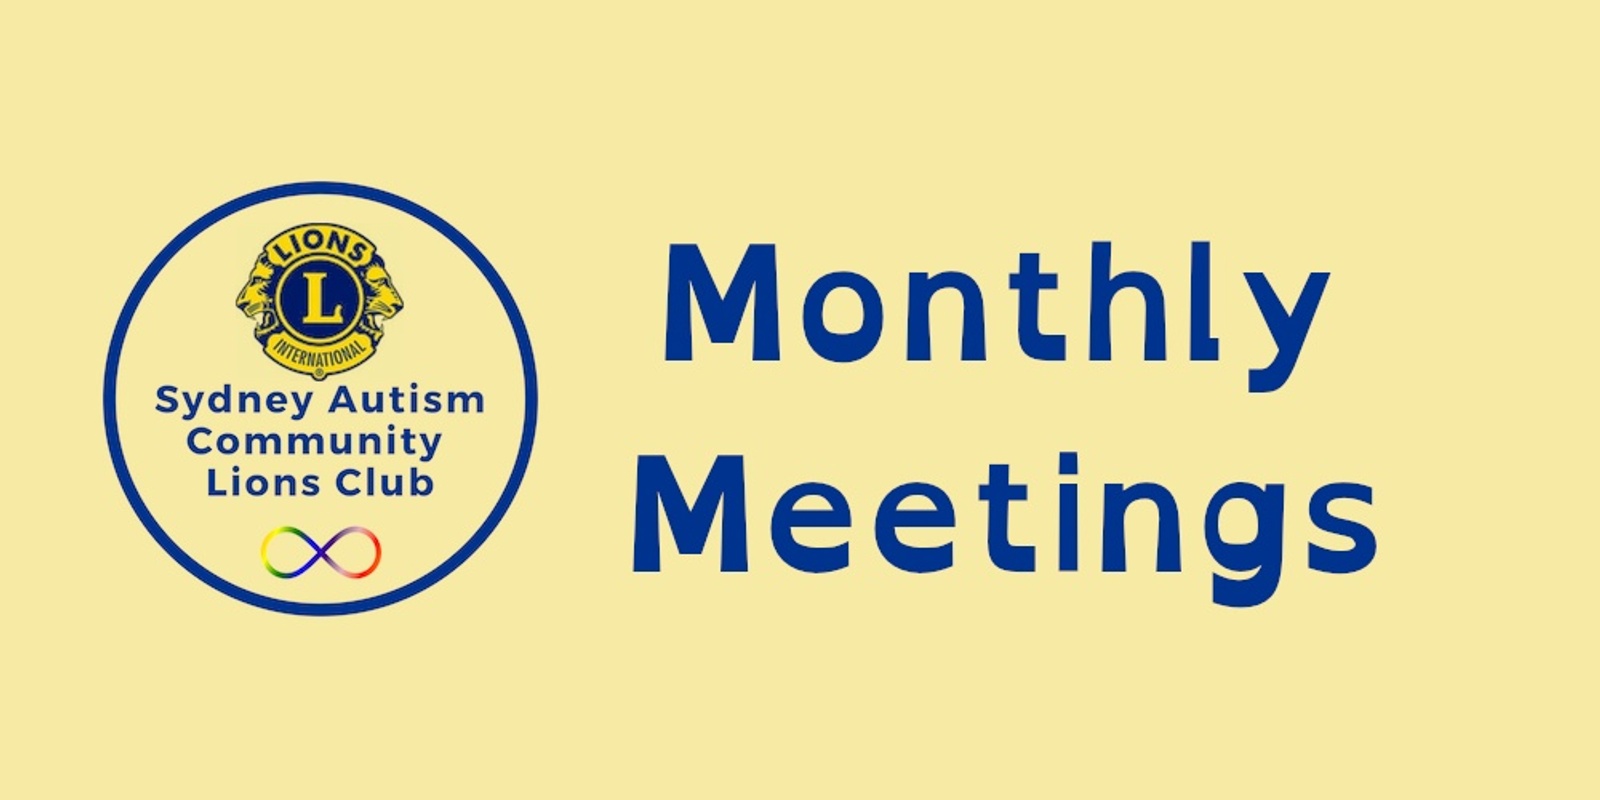 Sydney Autism Community Lions Club Monthly Meeting